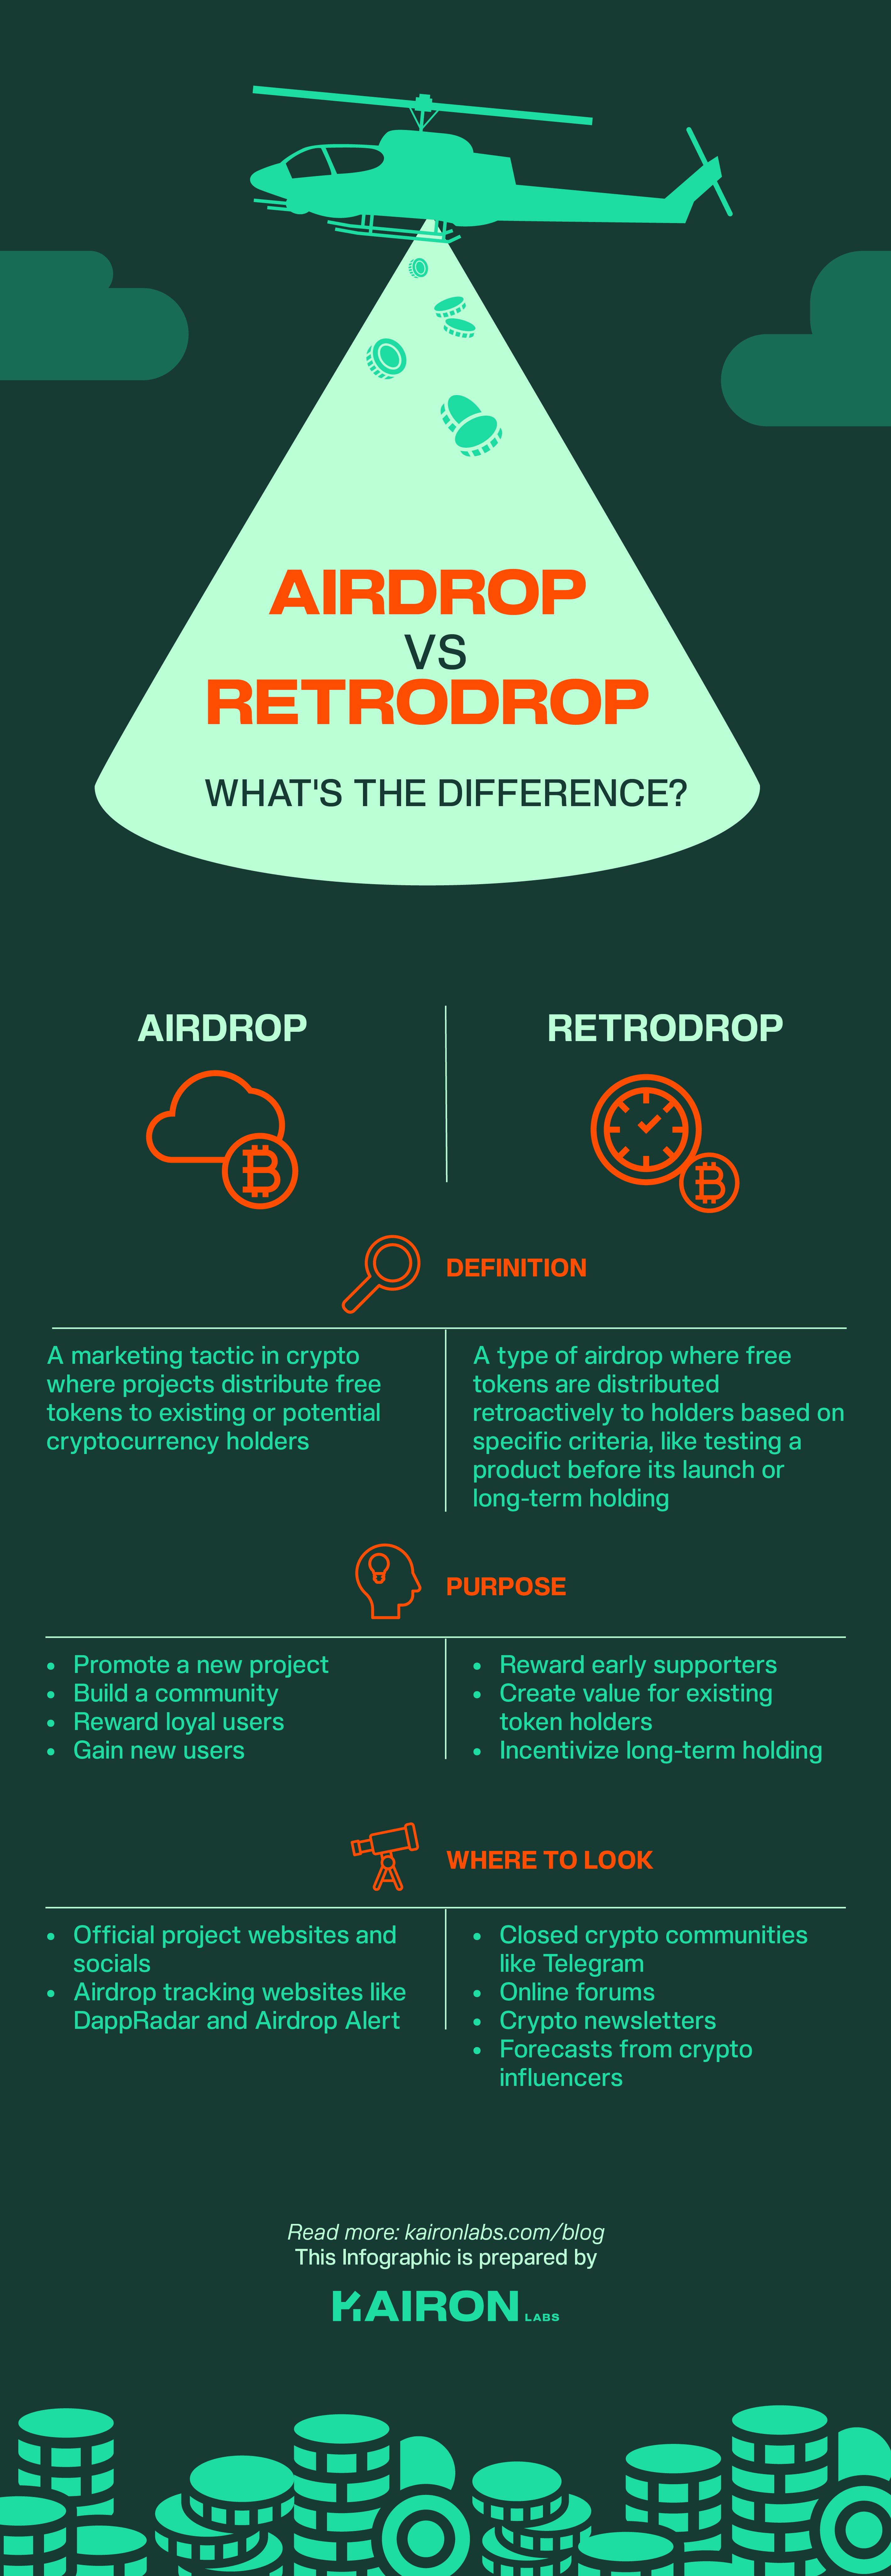 Airdrops and Retrodrops Decoded - What's the Difference Infographic